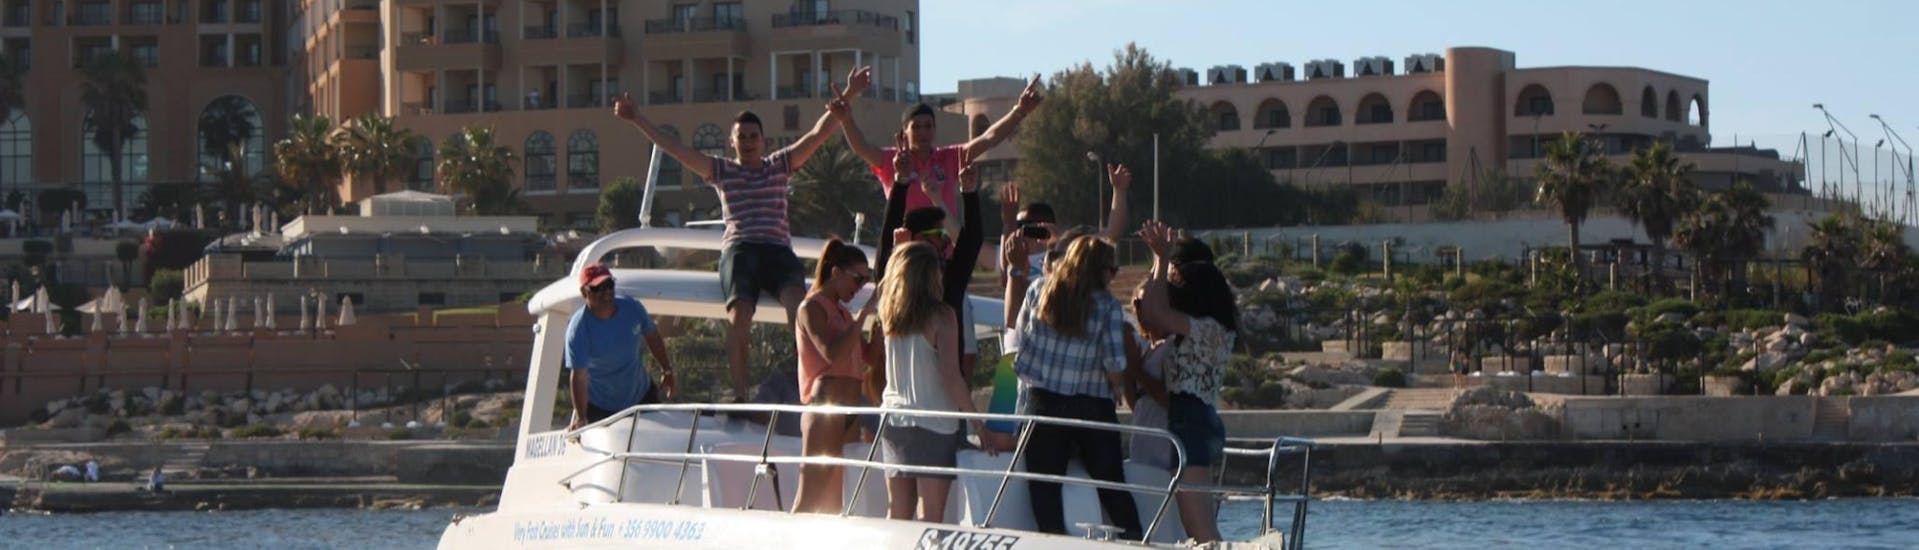 A group of people enjoy a boat trip in a self drive boat from Sun and Fun Watersports Malta.